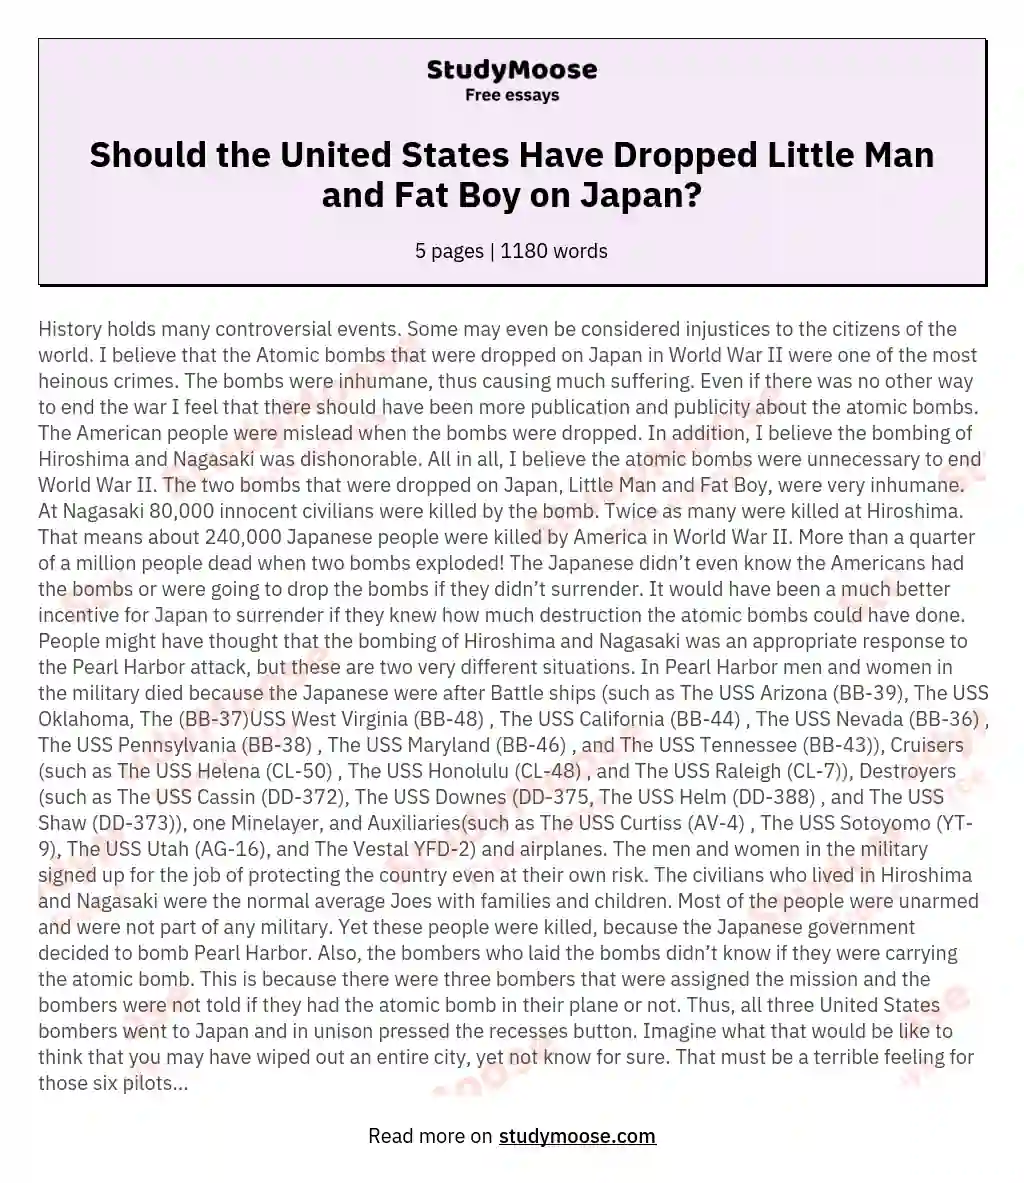 Should the United States Have Dropped Little Man and Fat Boy on Japan? essay